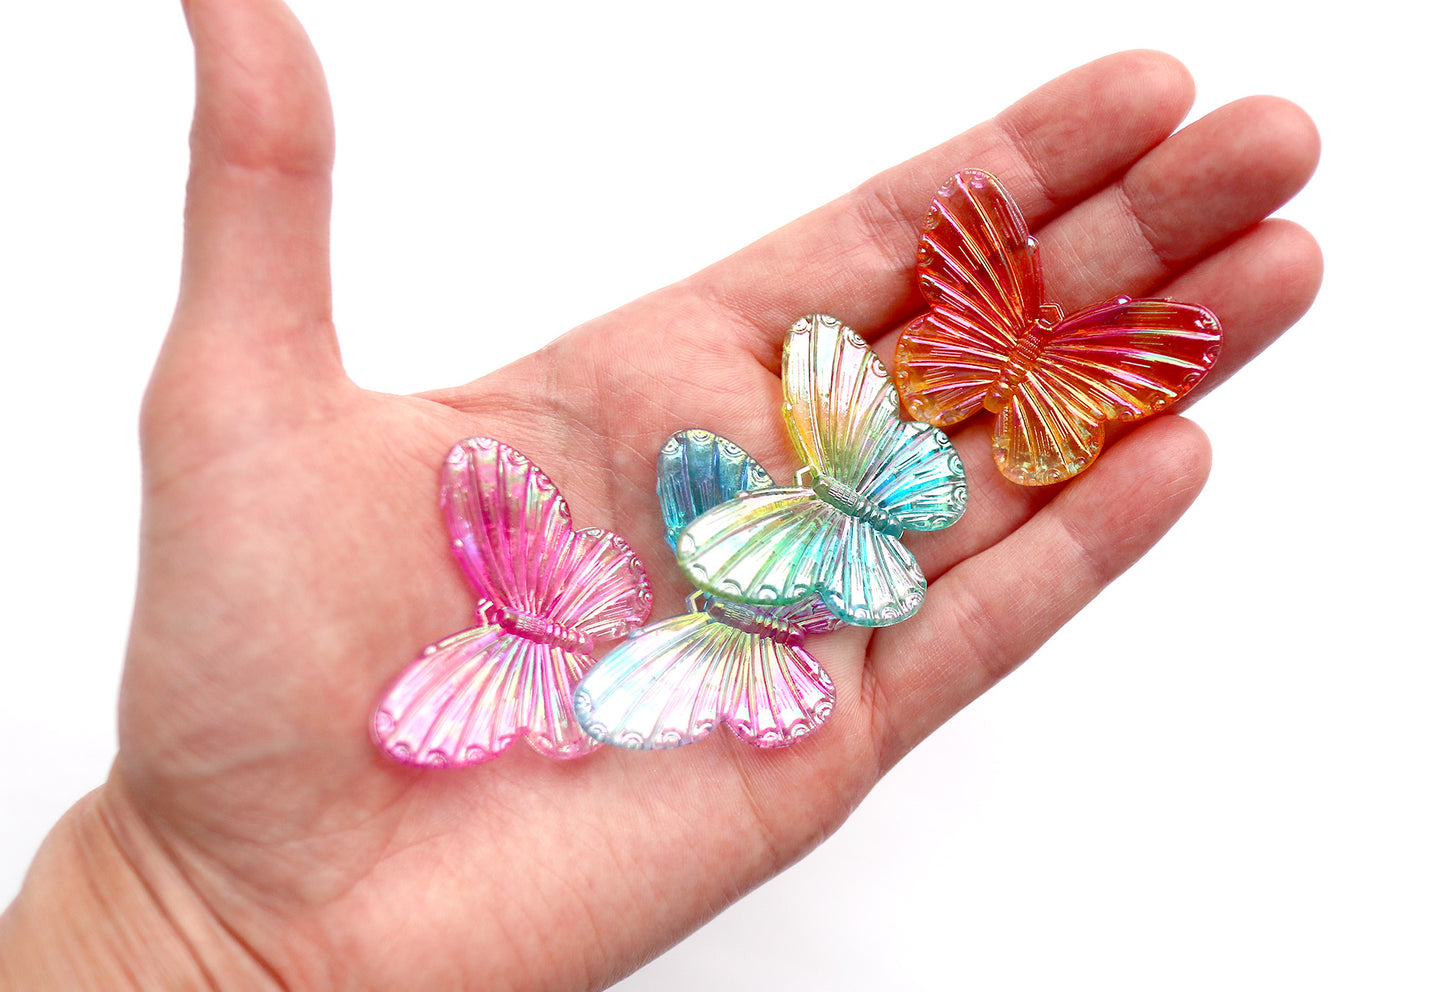 Butterfly Charms - 30mm Big AB Iridescent Butterfly Resin or Acrylic Plastic Charms or Pendants - 8 pc set